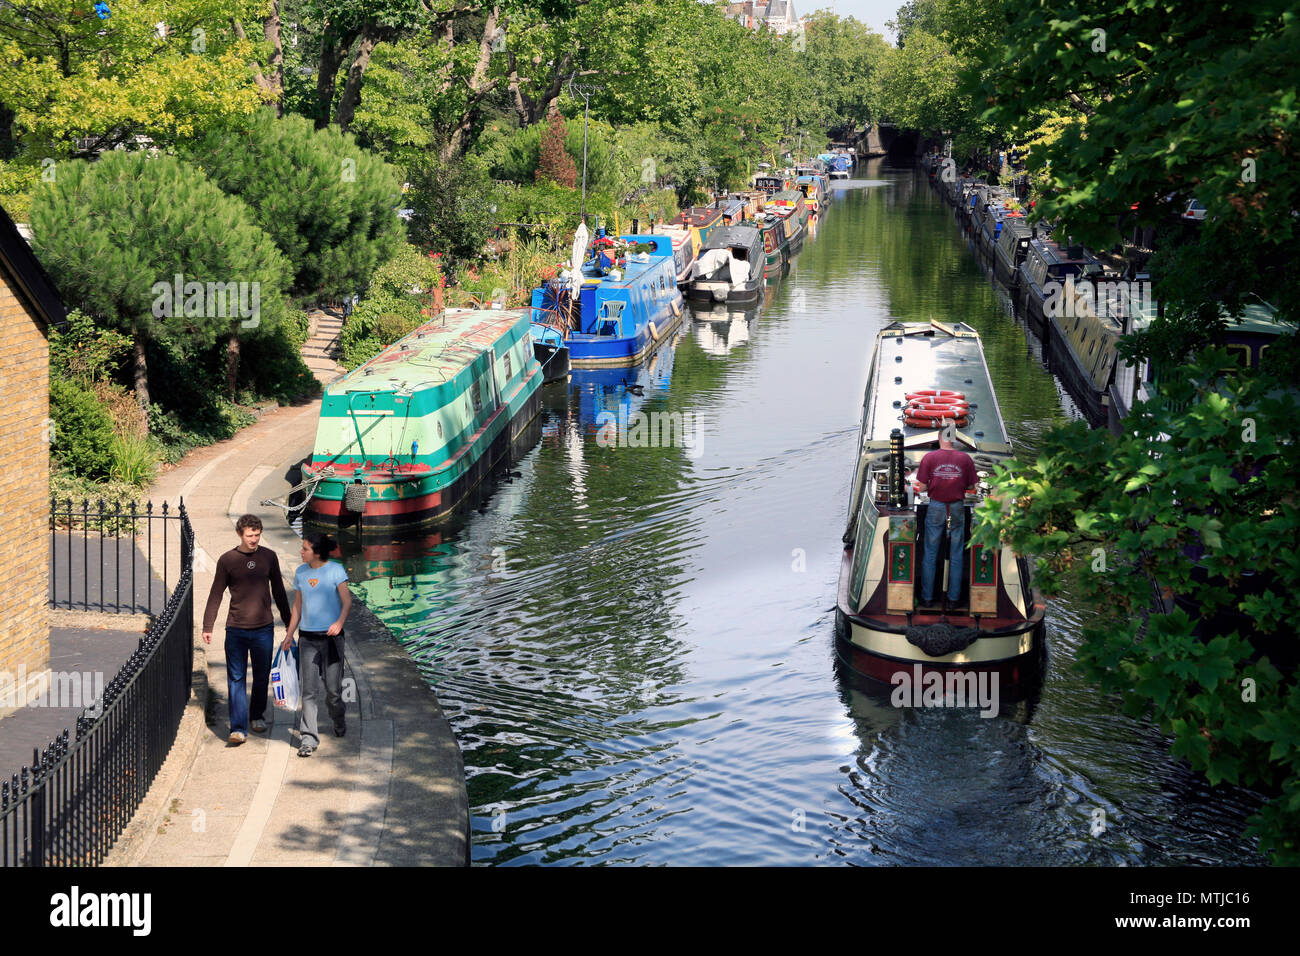 Narrowboat and Houseboats at Regents Canal 'Little Venice' in London Stock Photo